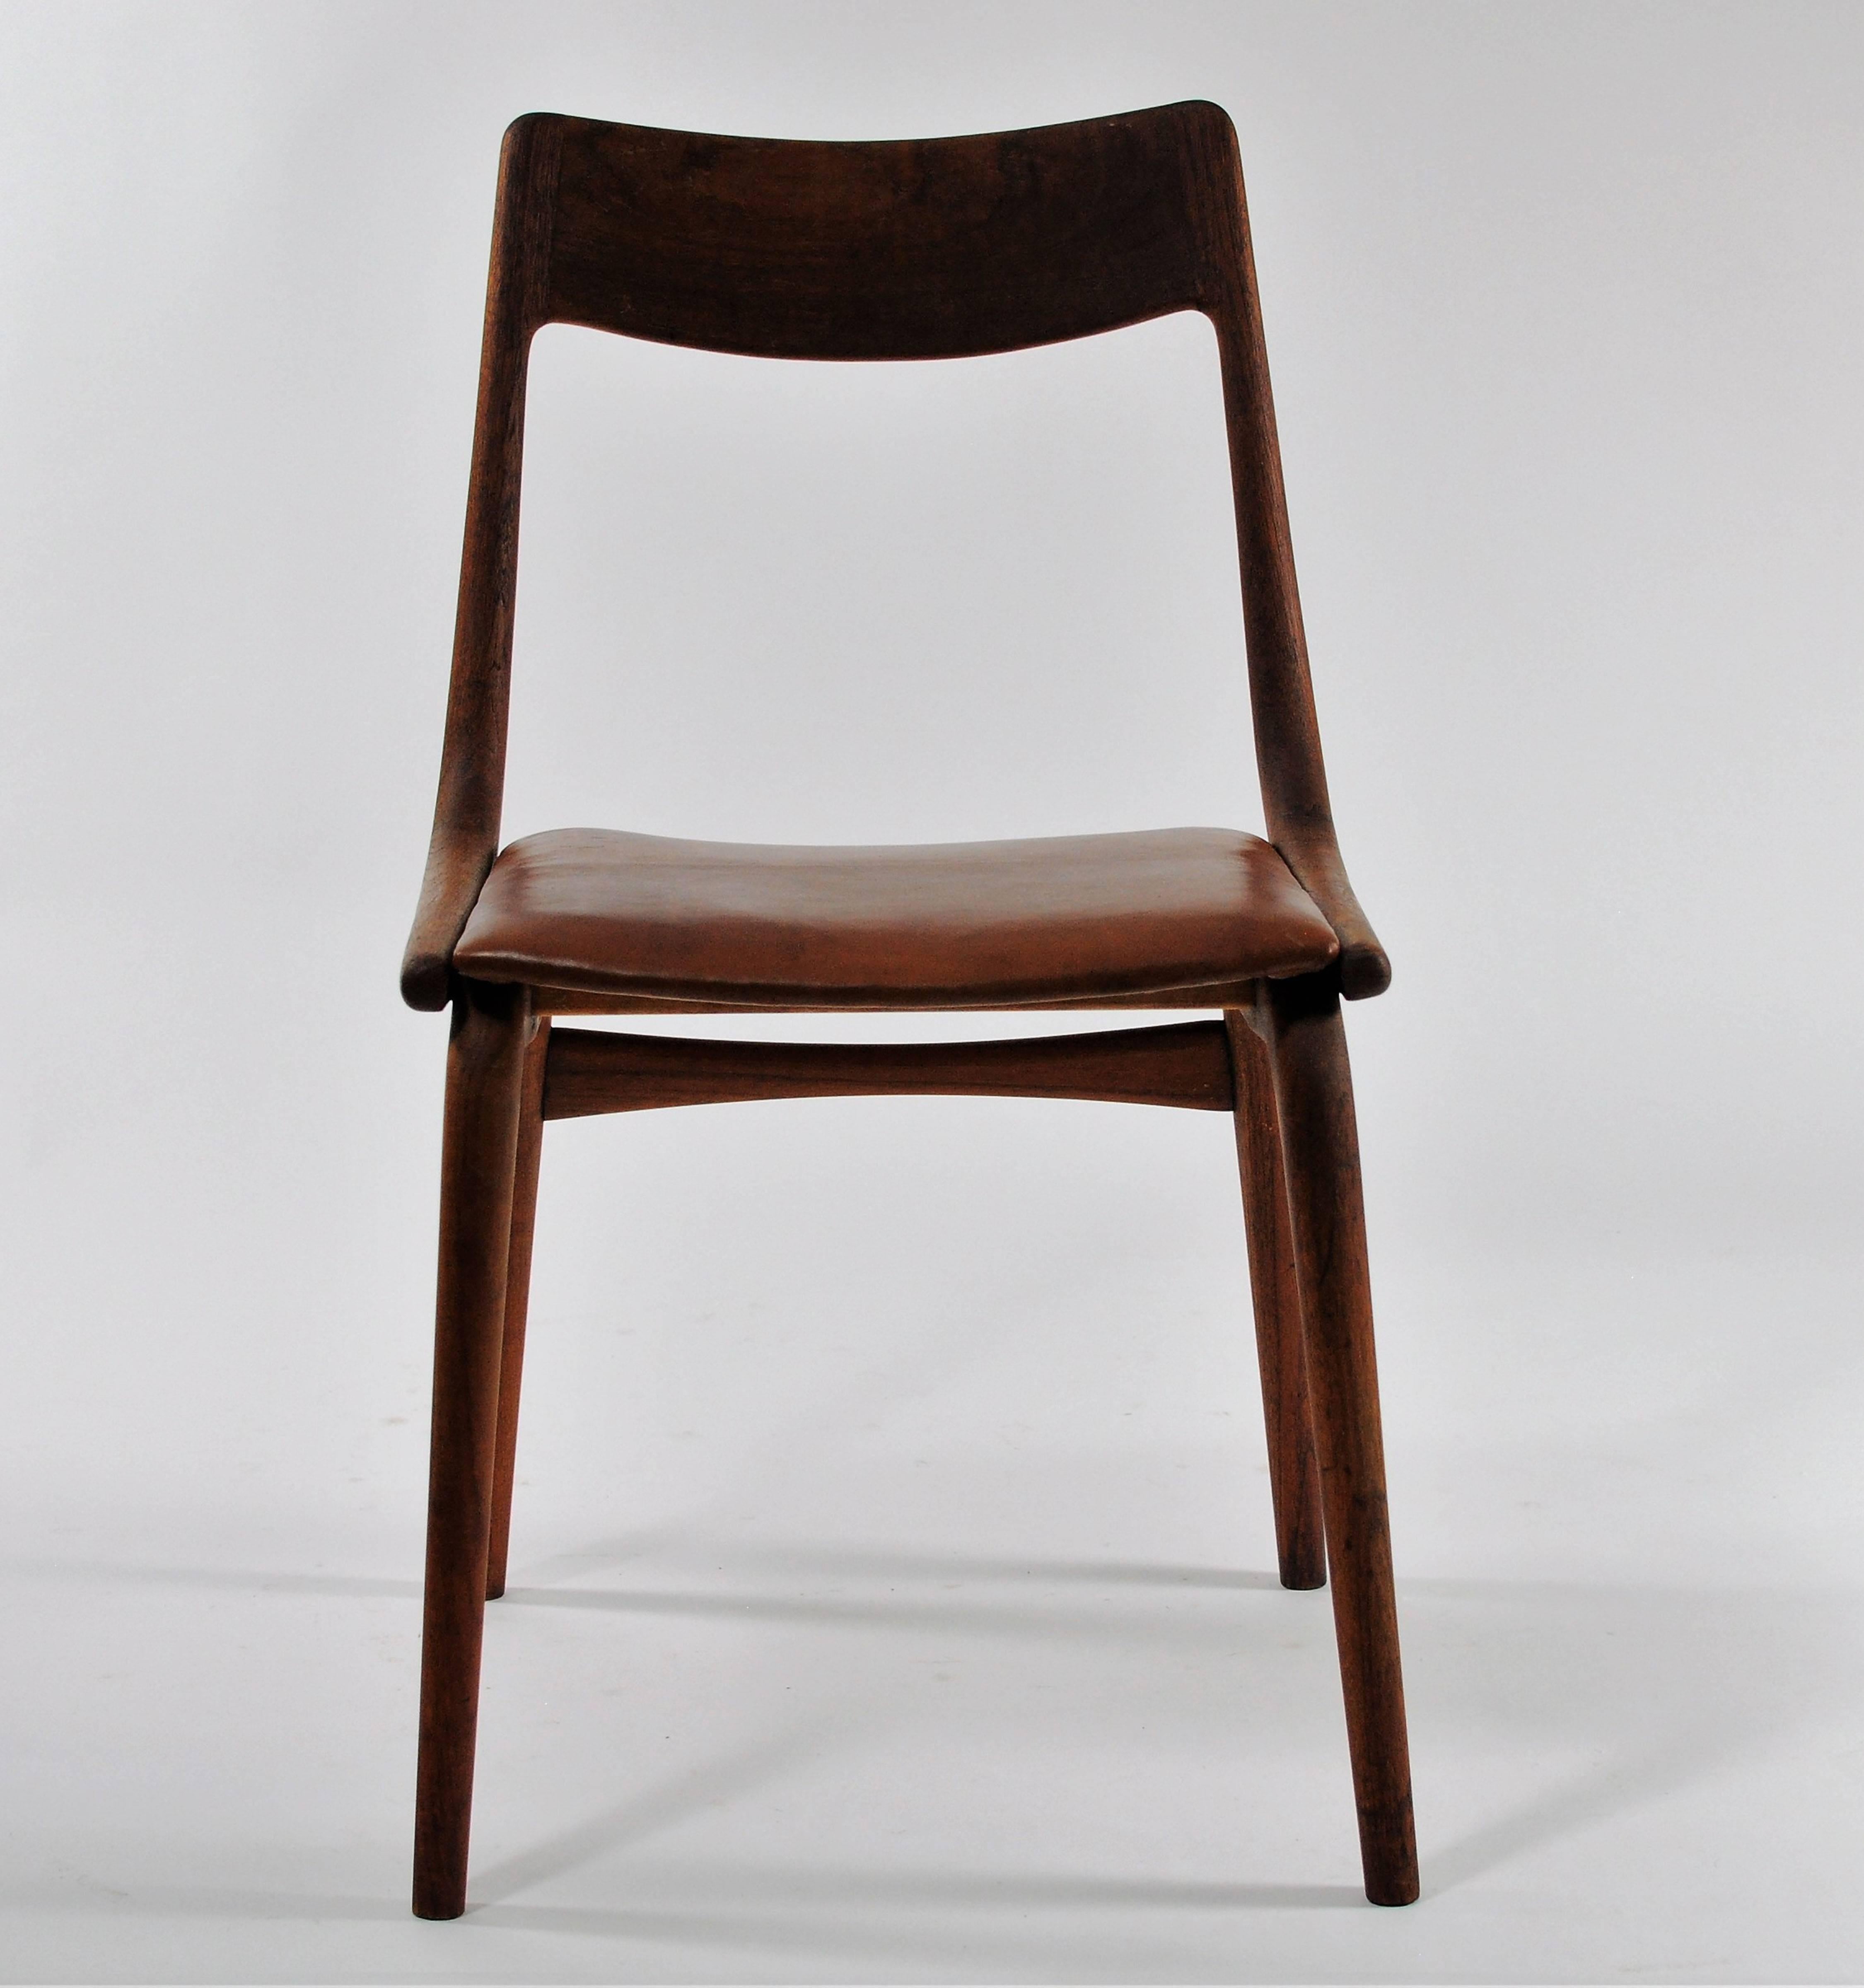 Set of six 1950s Danish boomerang dining chairs in teak by Erik Christiansen for Slagelse Møbelfabrik

The frames of the set has been refinished and seats are upholstered with soft brown high quality anilin leather from Sorensen leather. 

